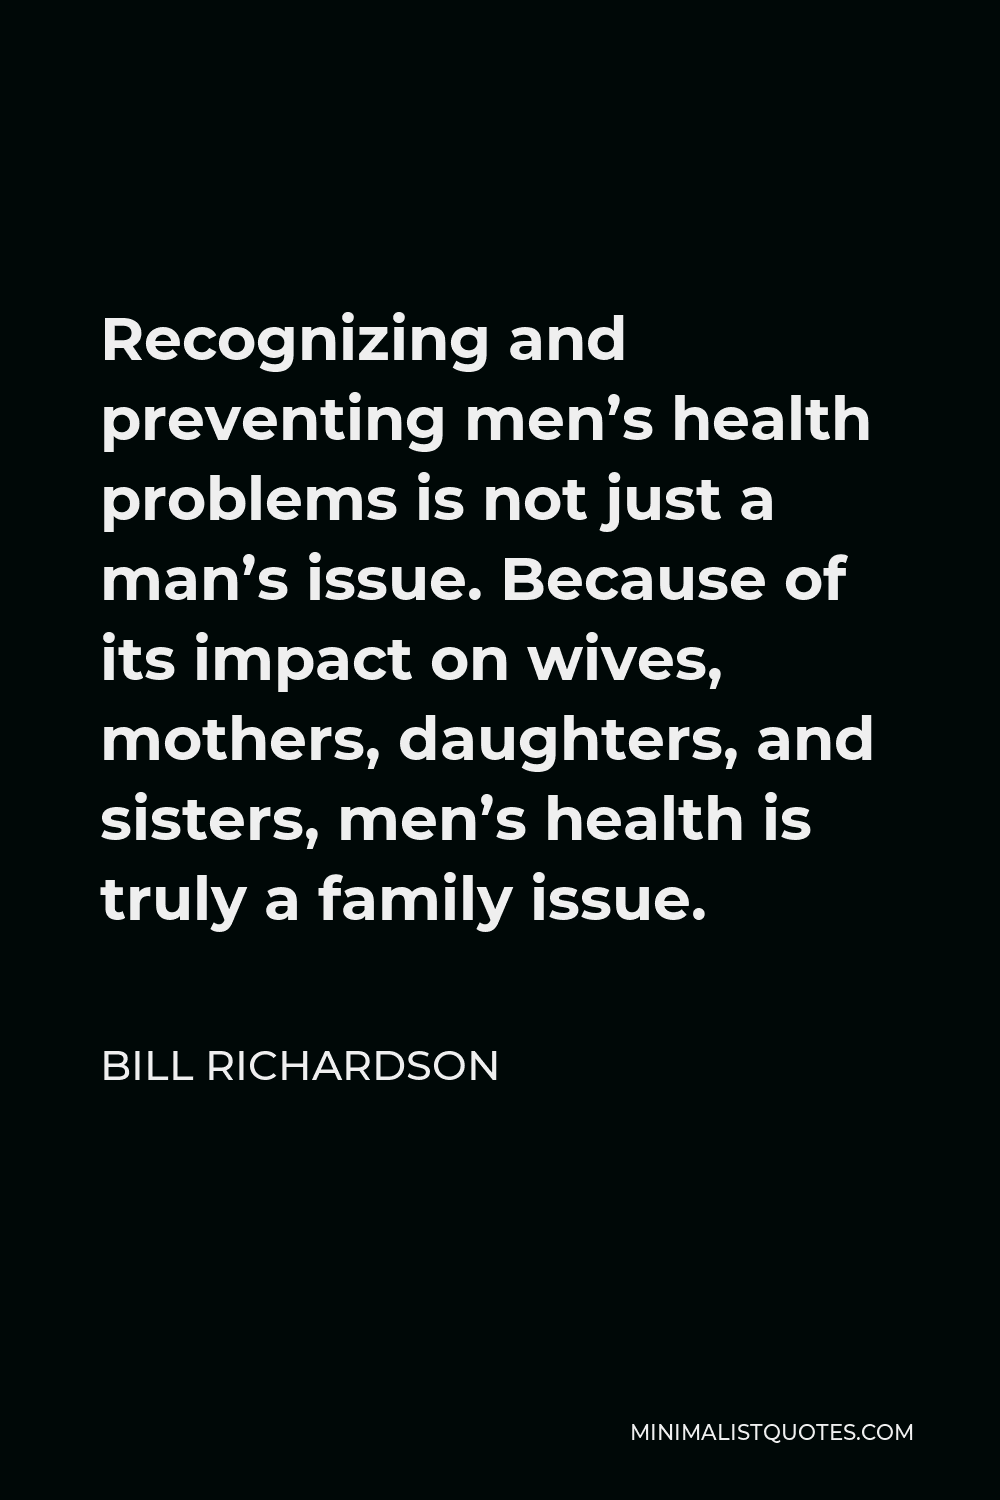 Bill Richardson Quote - Recognizing and preventing men’s health problems is not just a man’s issue. Because of its impact on wives, mothers, daughters, and sisters, men’s health is truly a family issue.